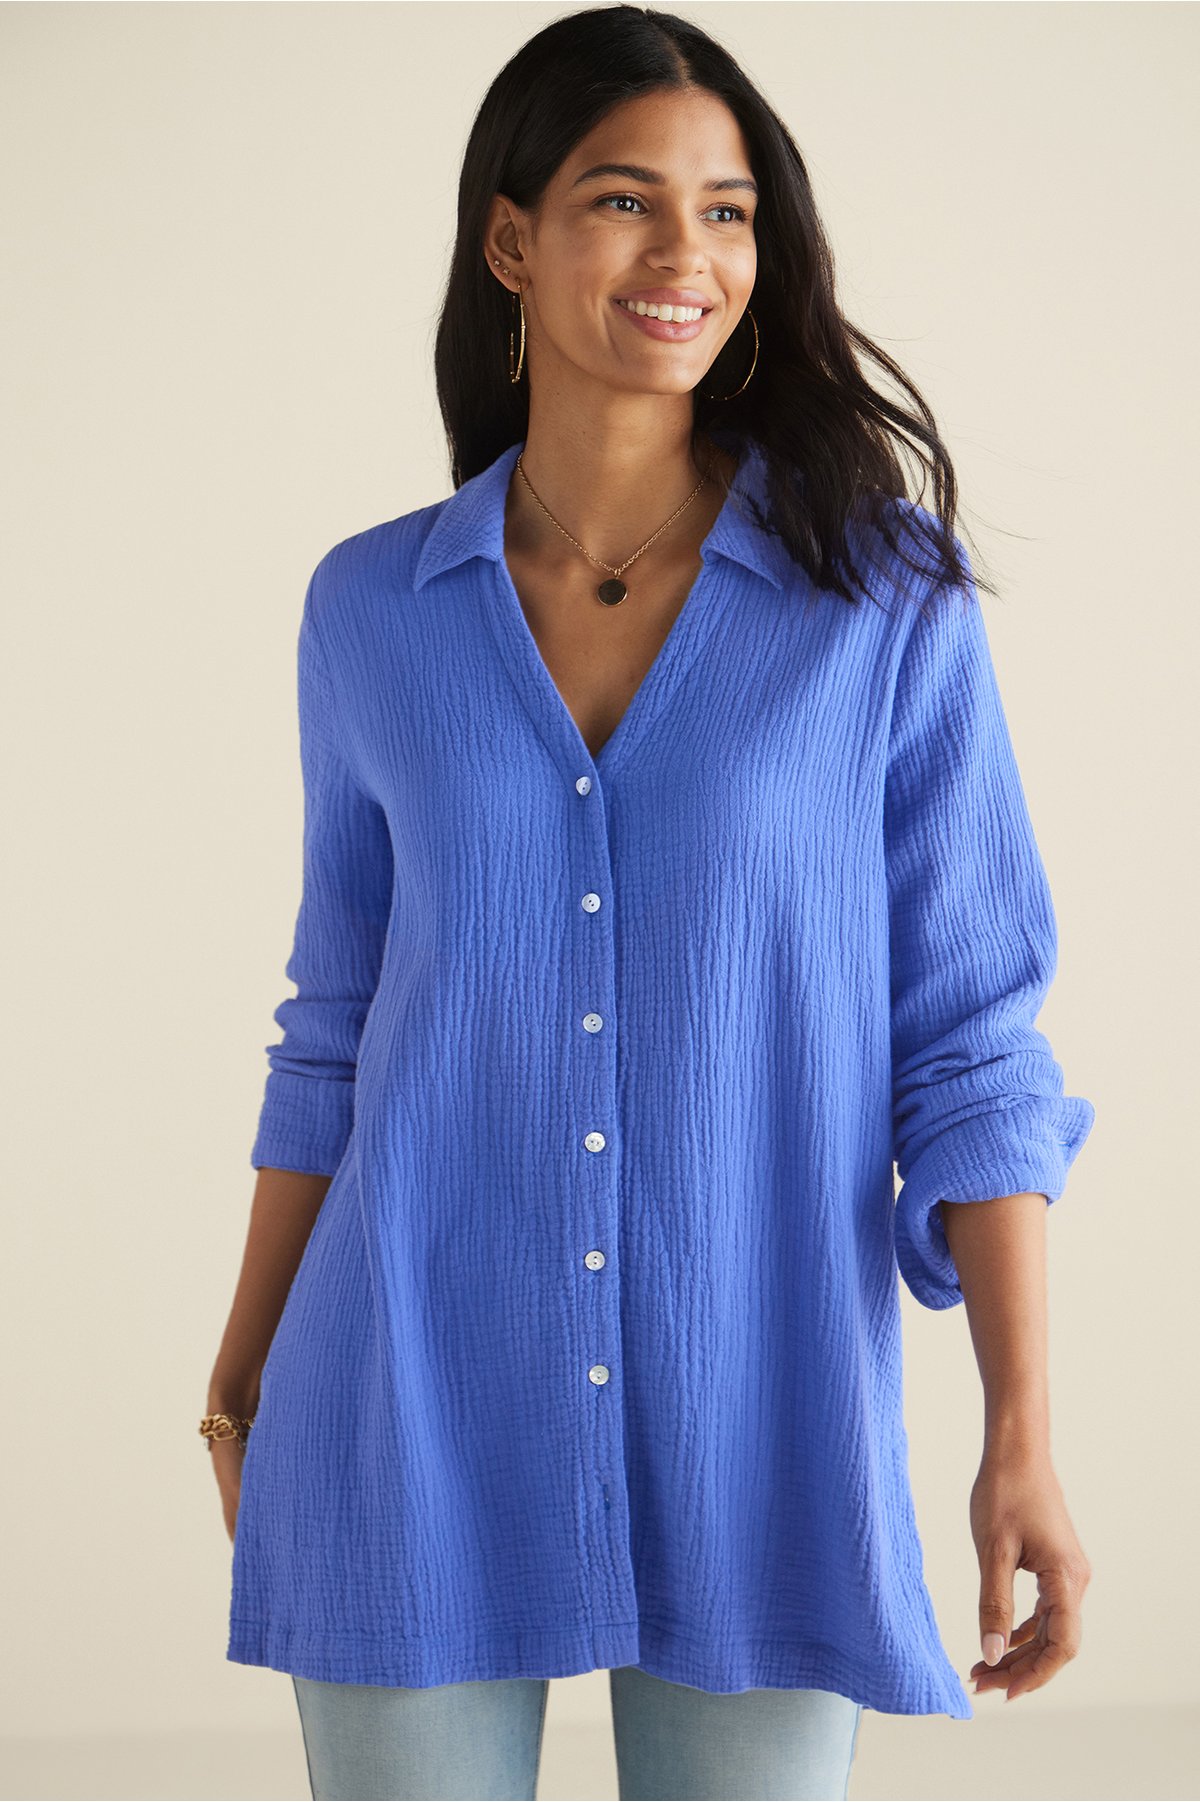 Escambia Gauze Tunic Shirt | Soft Surroundings Outlet